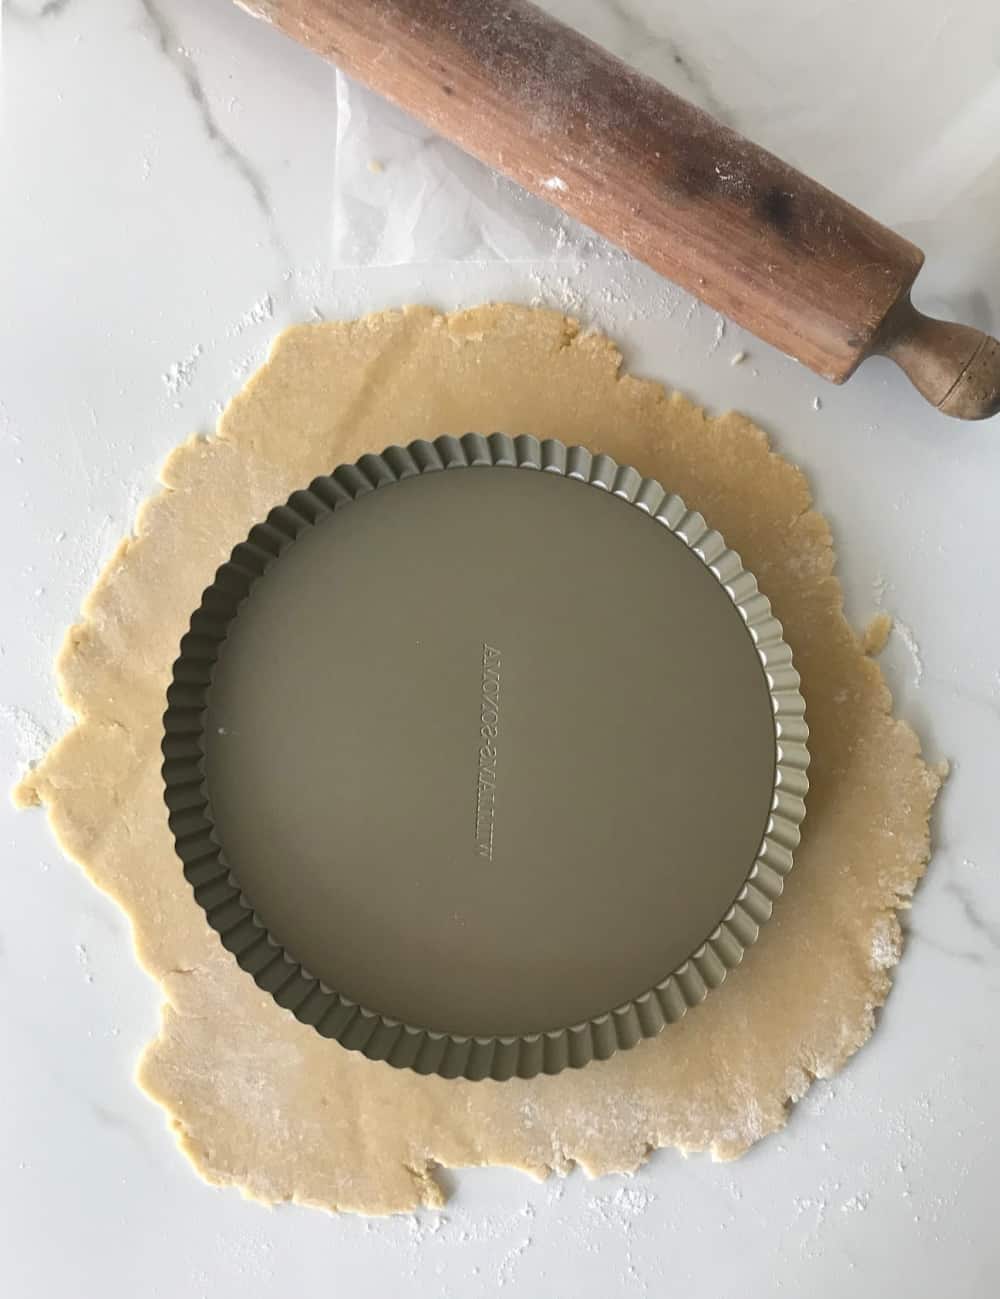 Round of sweet dough with pie pan on top, white surface, rolling pin